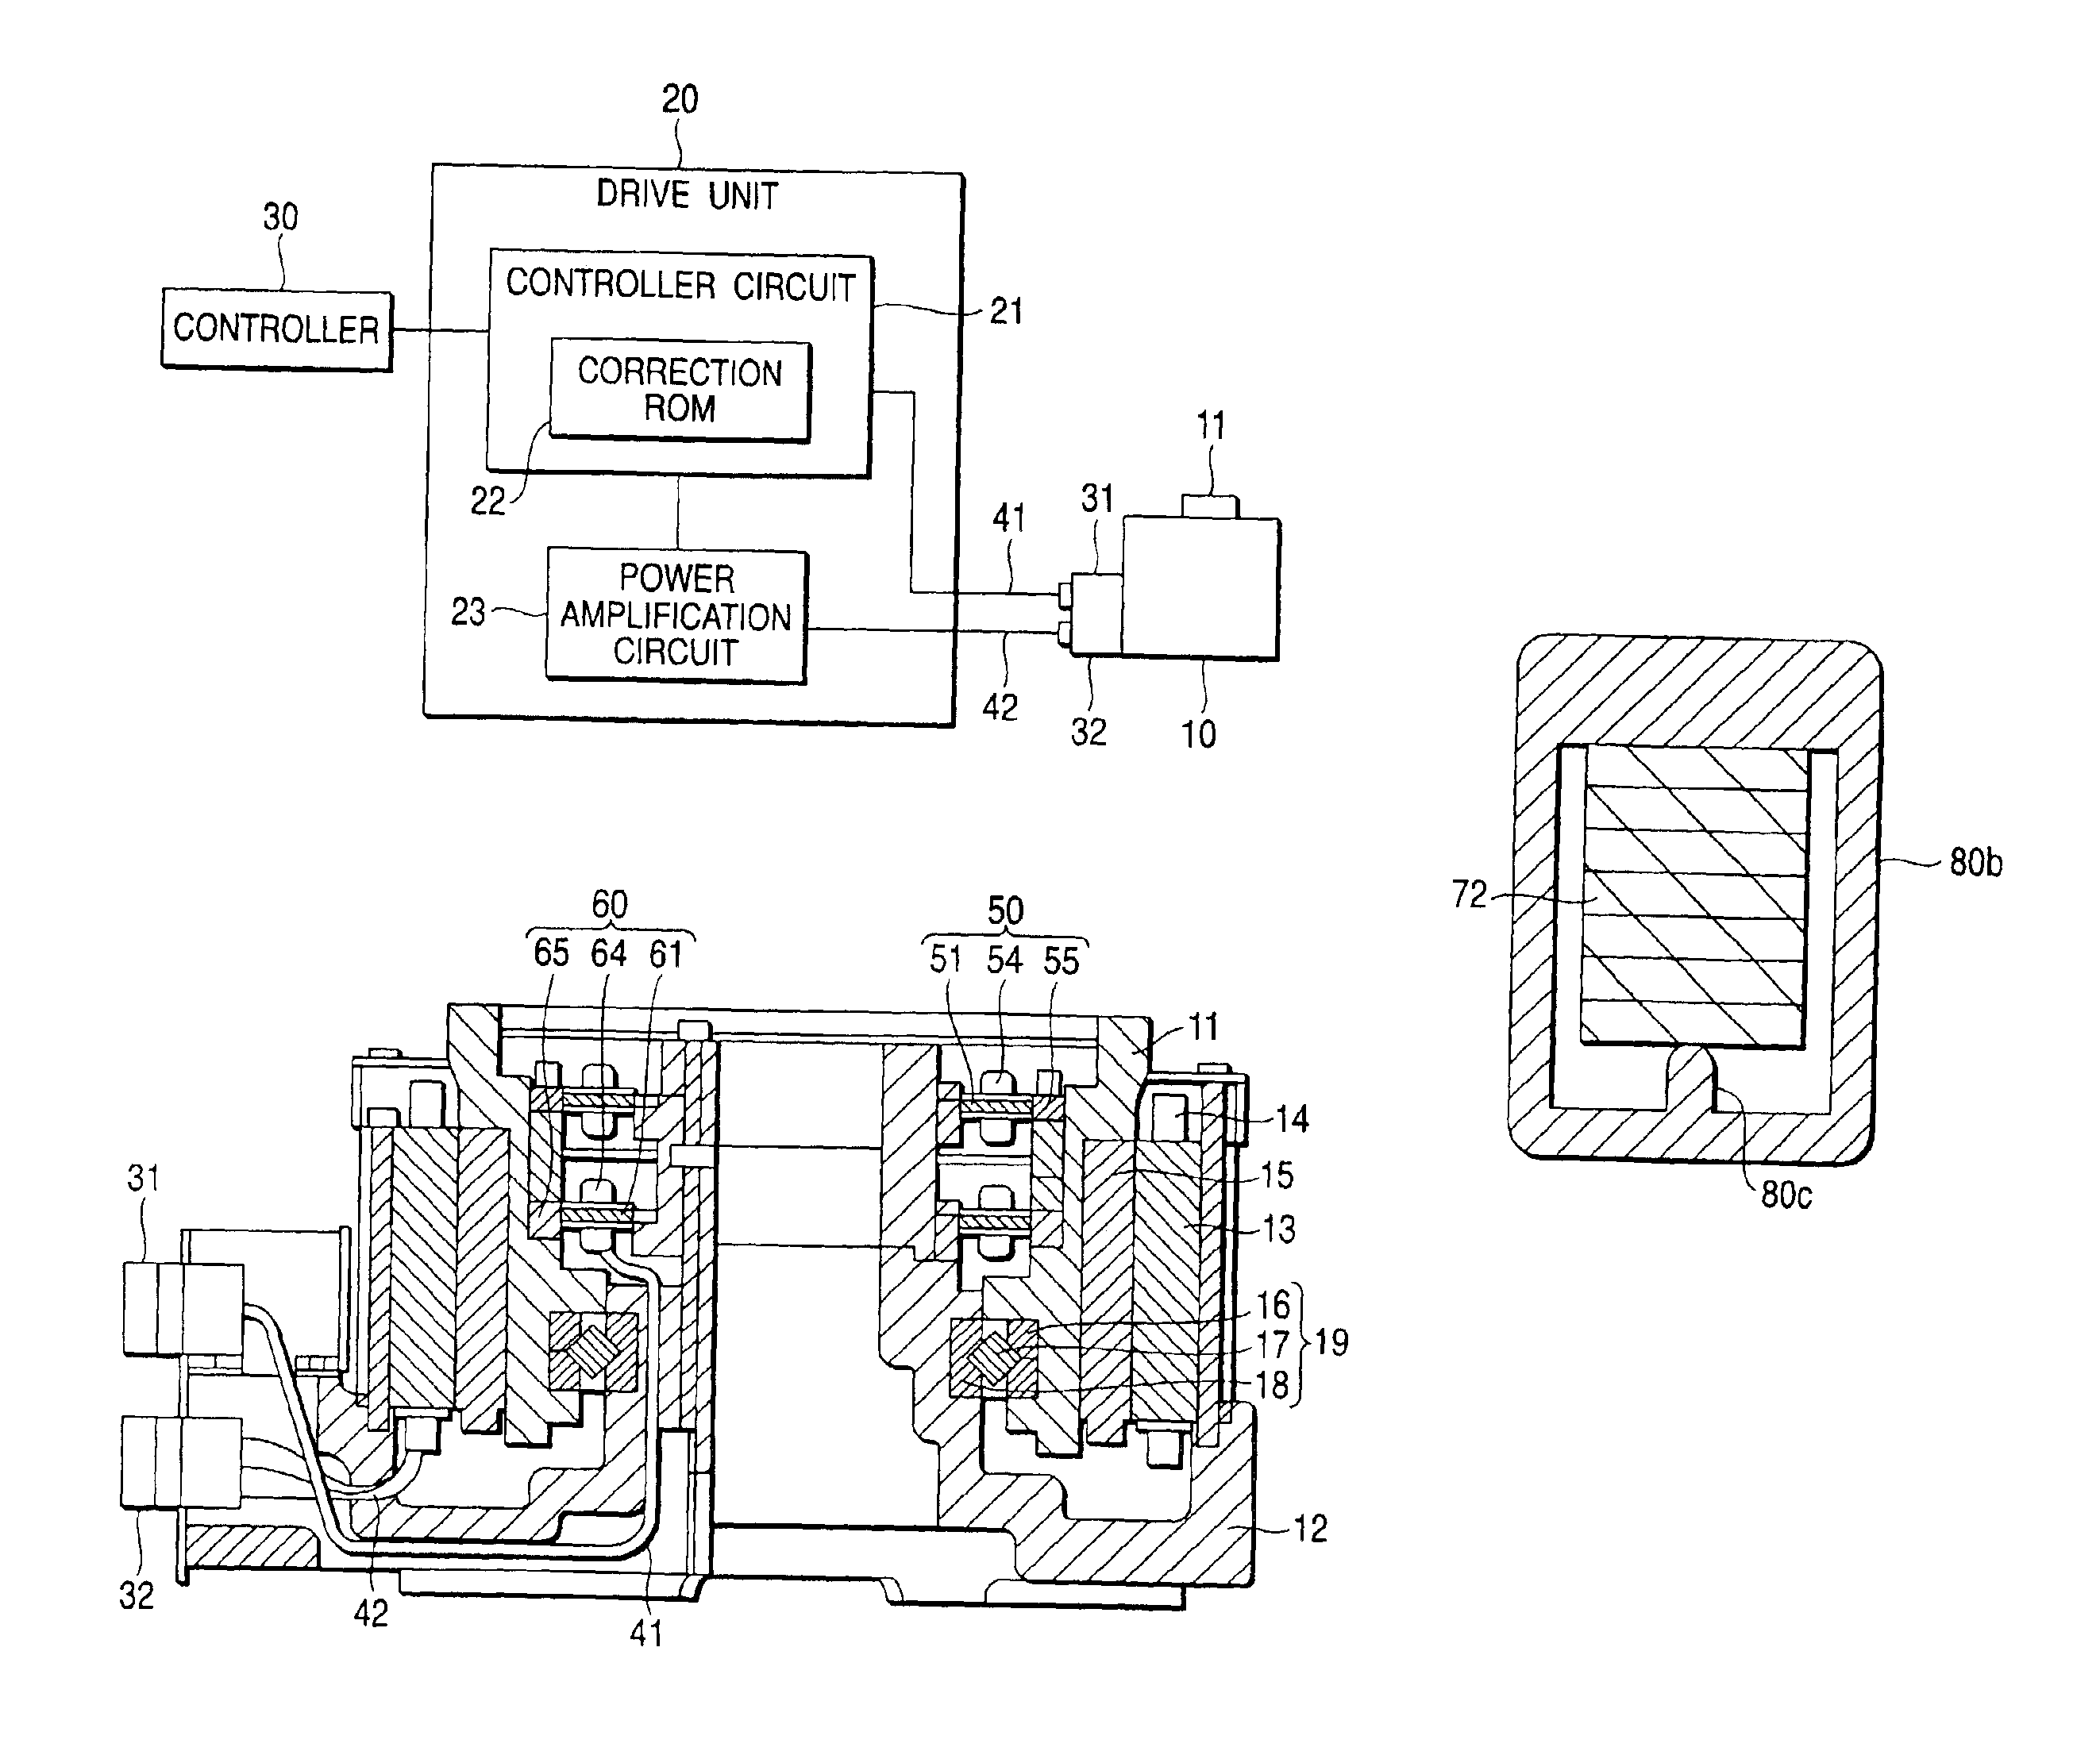 Synchronous resolver, resolver cable and direct drive motor system